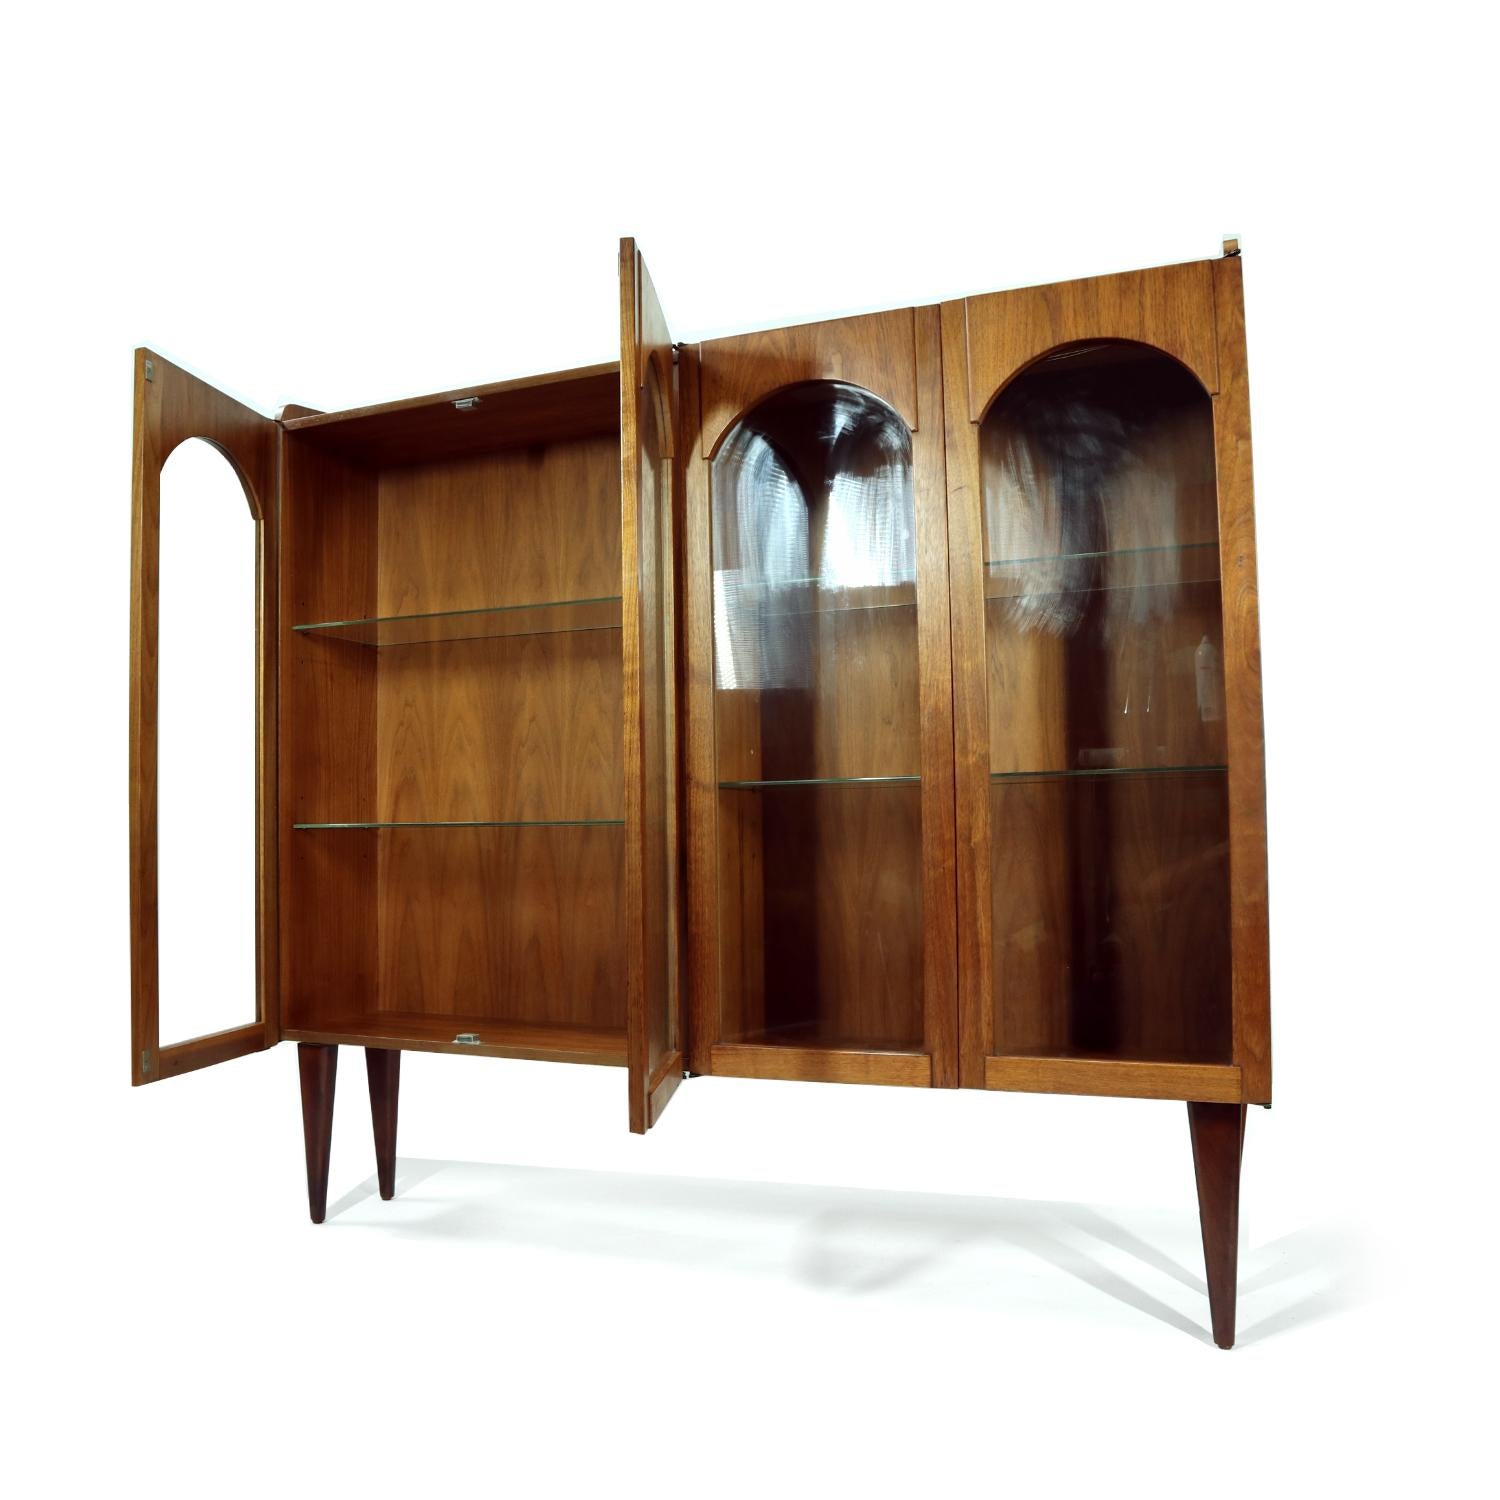 Handsome Mid-Century Modern walnut wood china cabinet with novel arched facade. This four bay china cabinet features four glass shelves inside. Reposition the shelves as you wish to create the perfect display for your cherished collectibles or